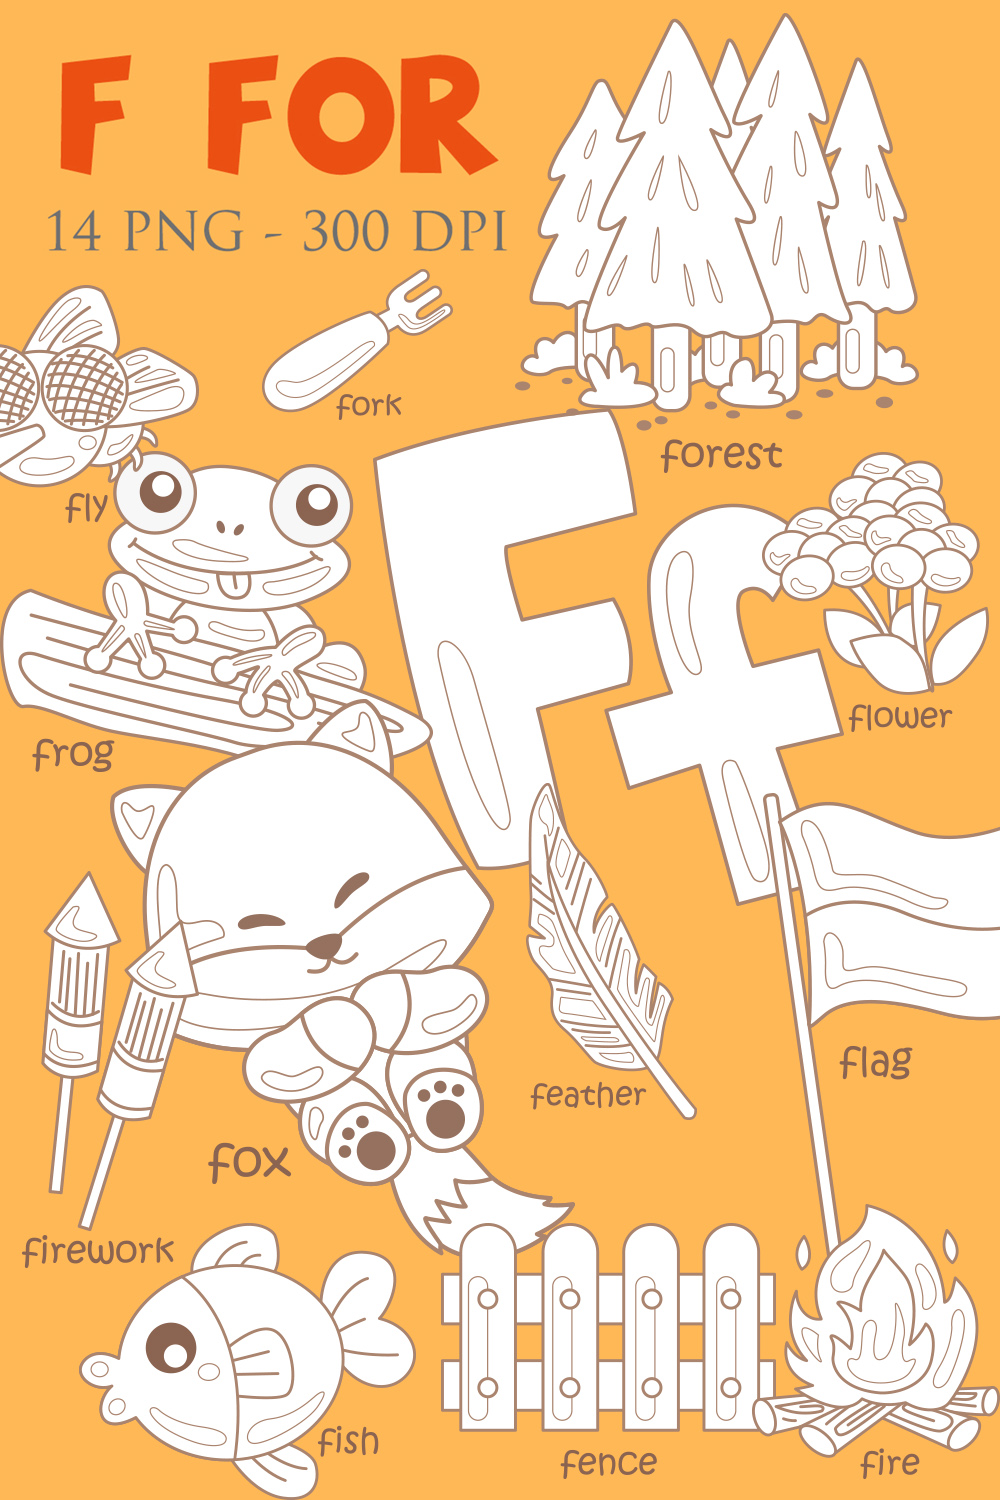 Alphabet F For Vocabulary School Letter Reading Writing Font Study Learning Student Toodler Kids Feather Fly Fence Fork Frog Fox Fire Flag Flower Fish Forest Firework Cartoon Digital Stamp Outline pinterest preview image.